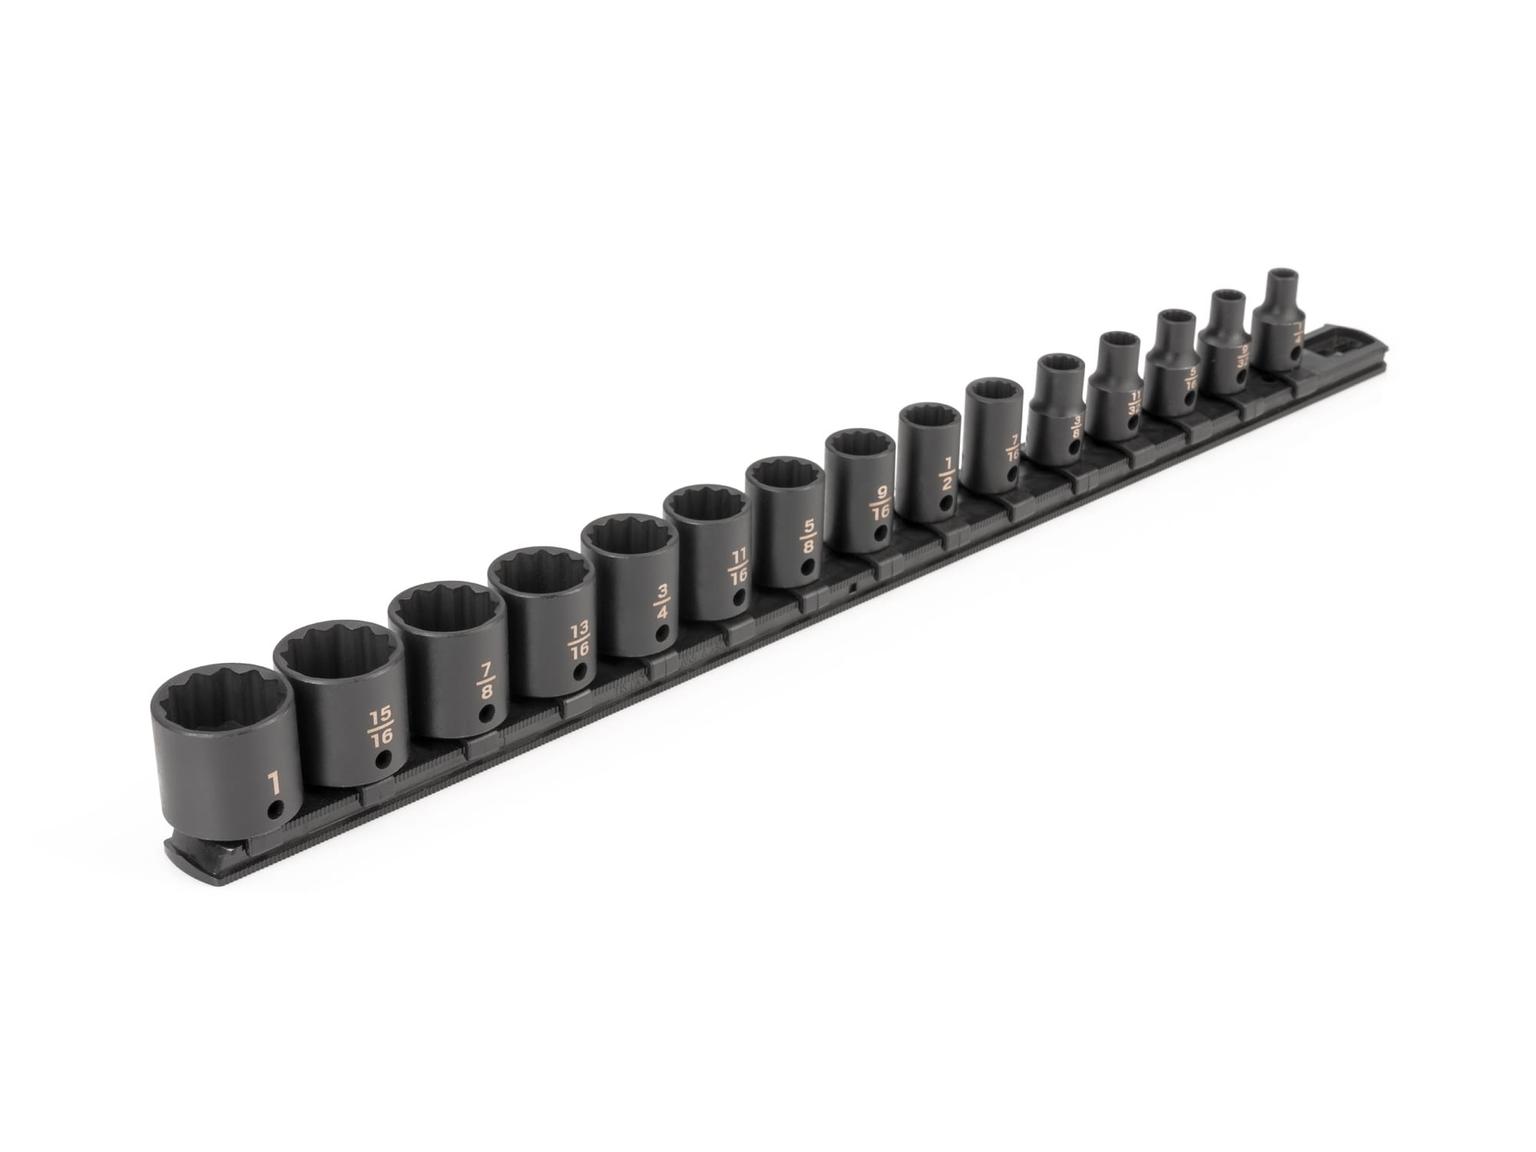 TEKTON SID91112-T 3/8 Inch Drive 12-Point Impact Socket Set with Rail, 15-Piece (1/4-1 in.)